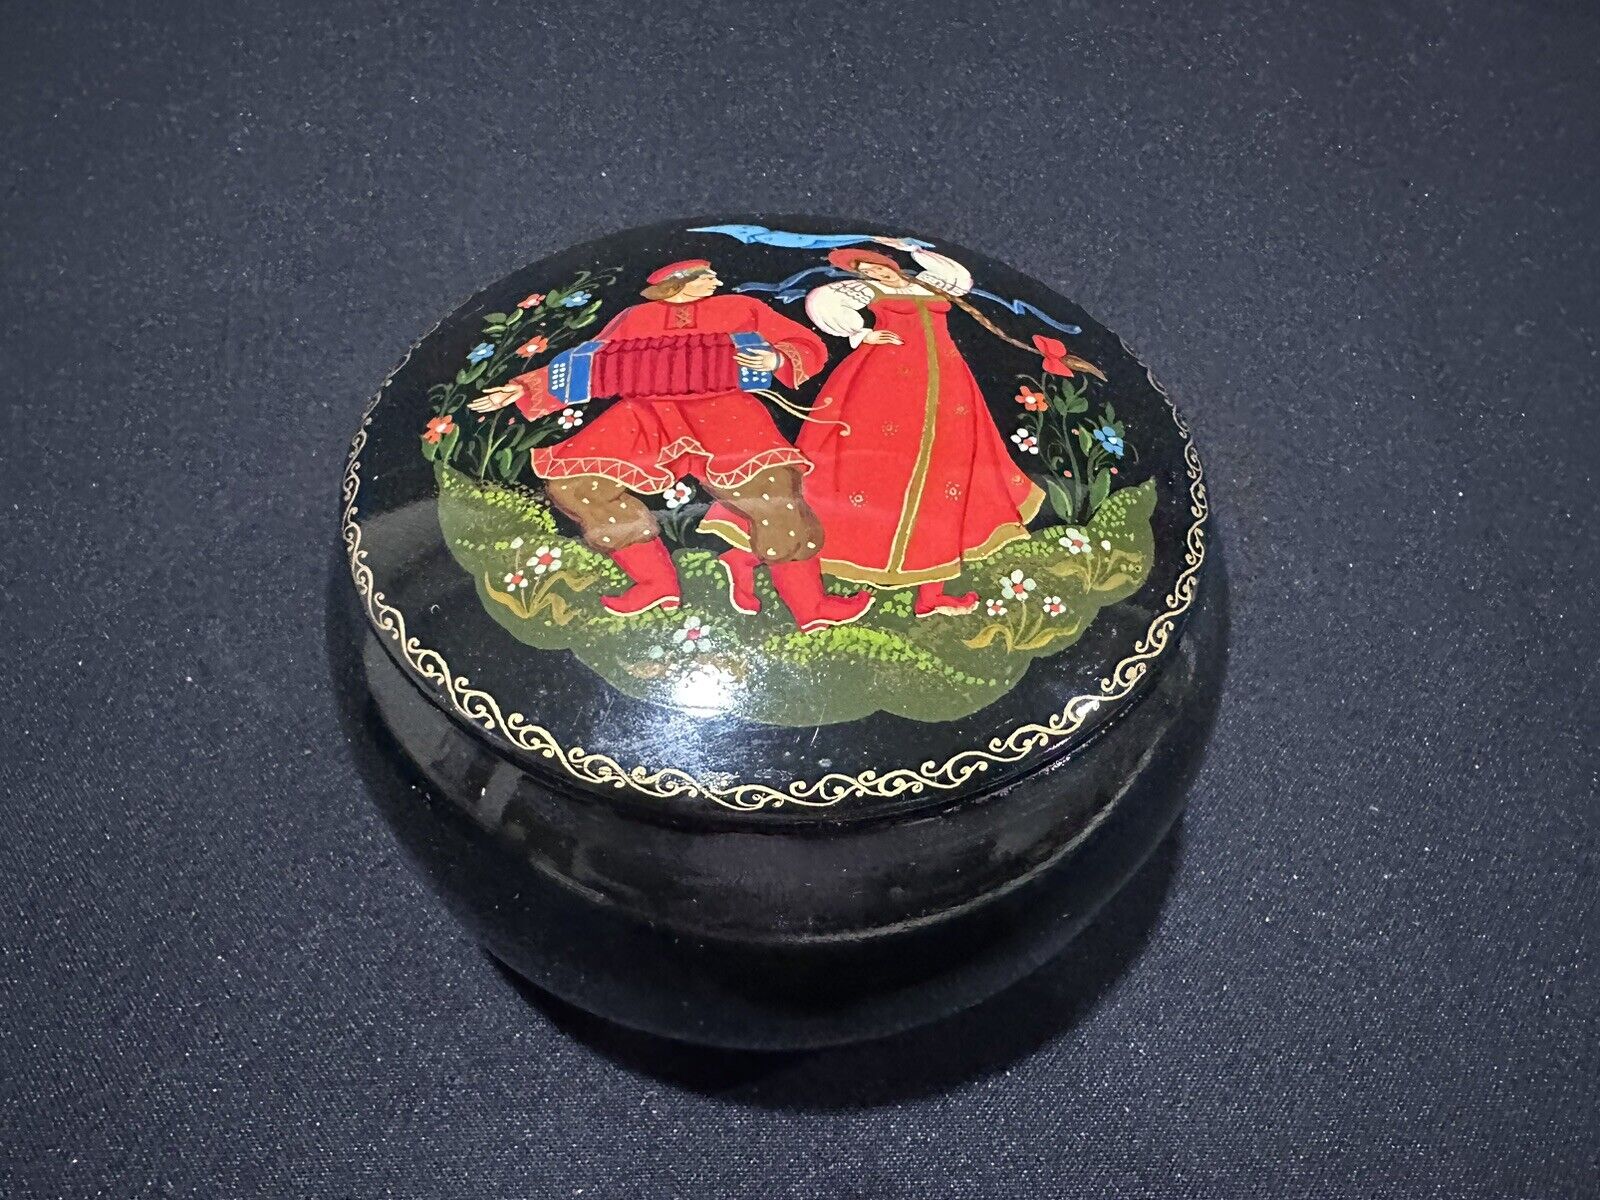 BERIOZKA Fairy Tale Tole Paint Lacquer Metal Covered Bowl Round Trinket box